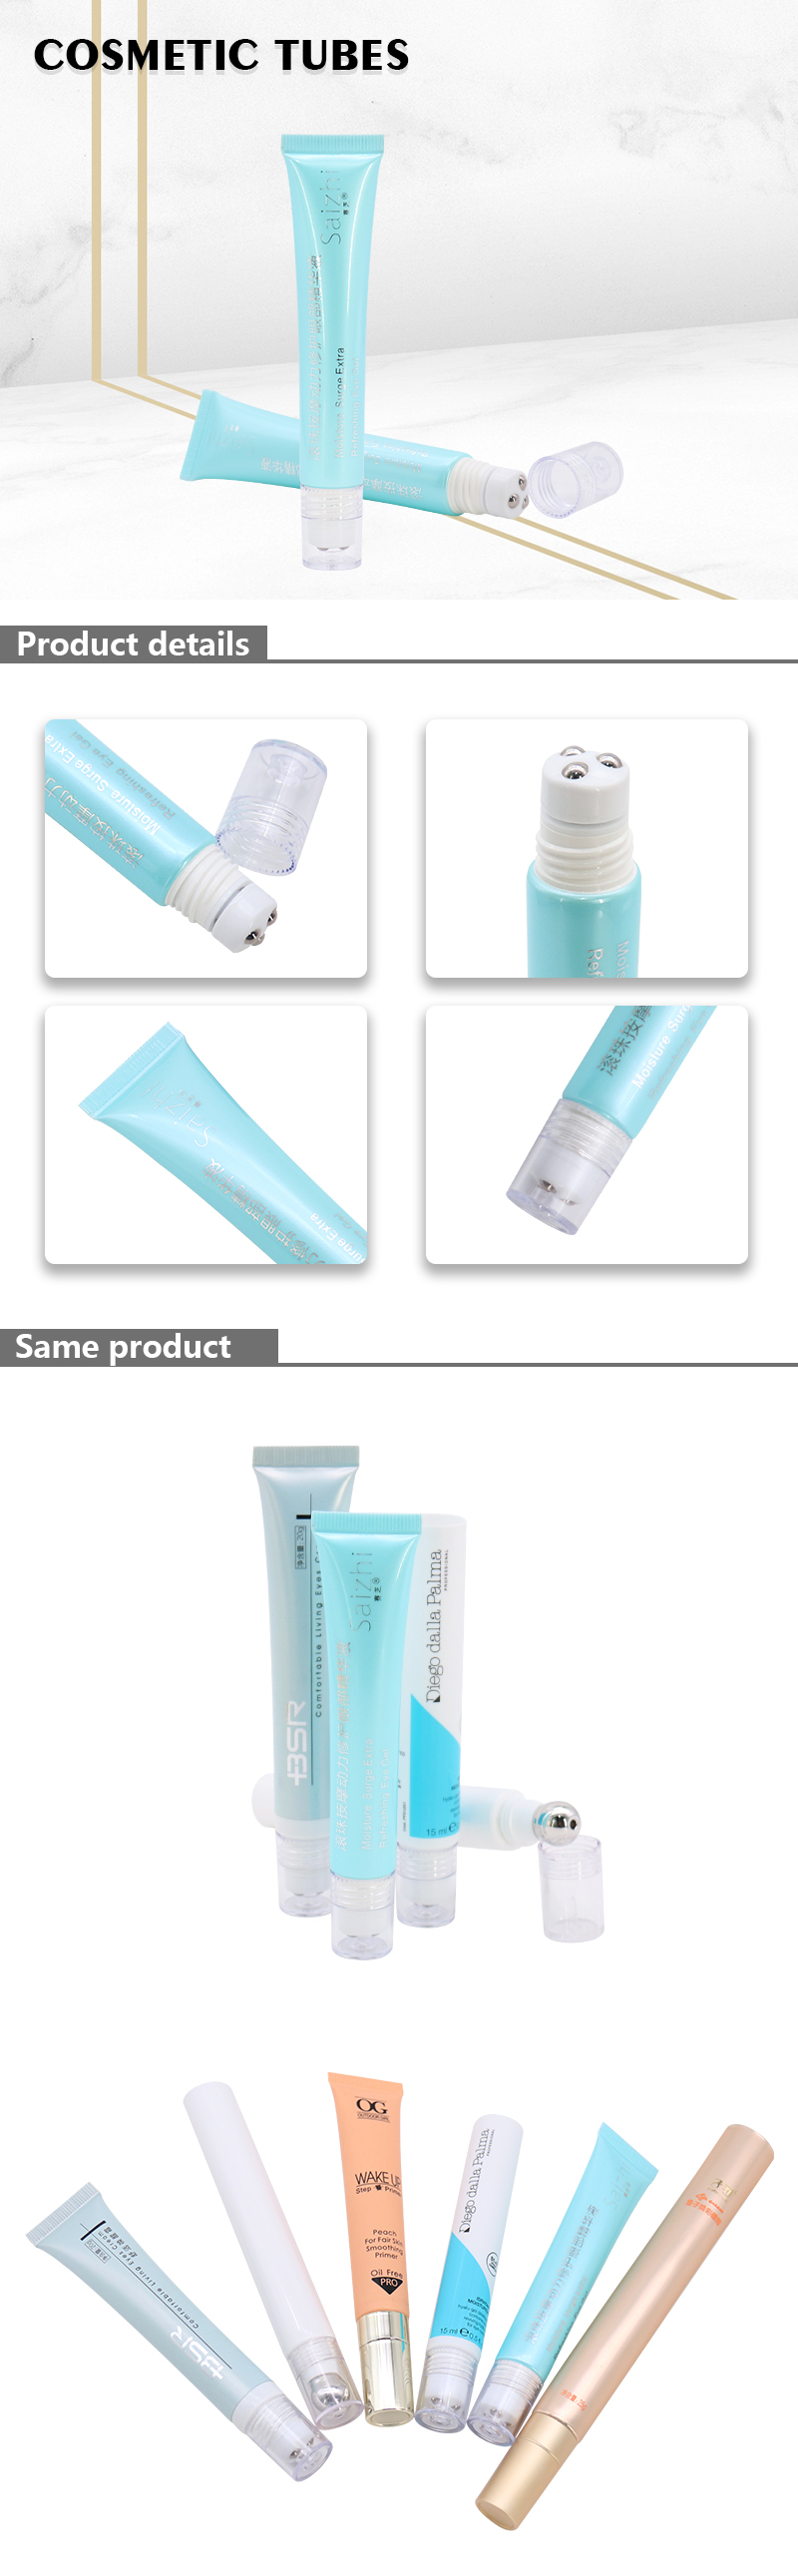 20g Empty Plastic Eye Cream Squeeze Tube With Roller Ball